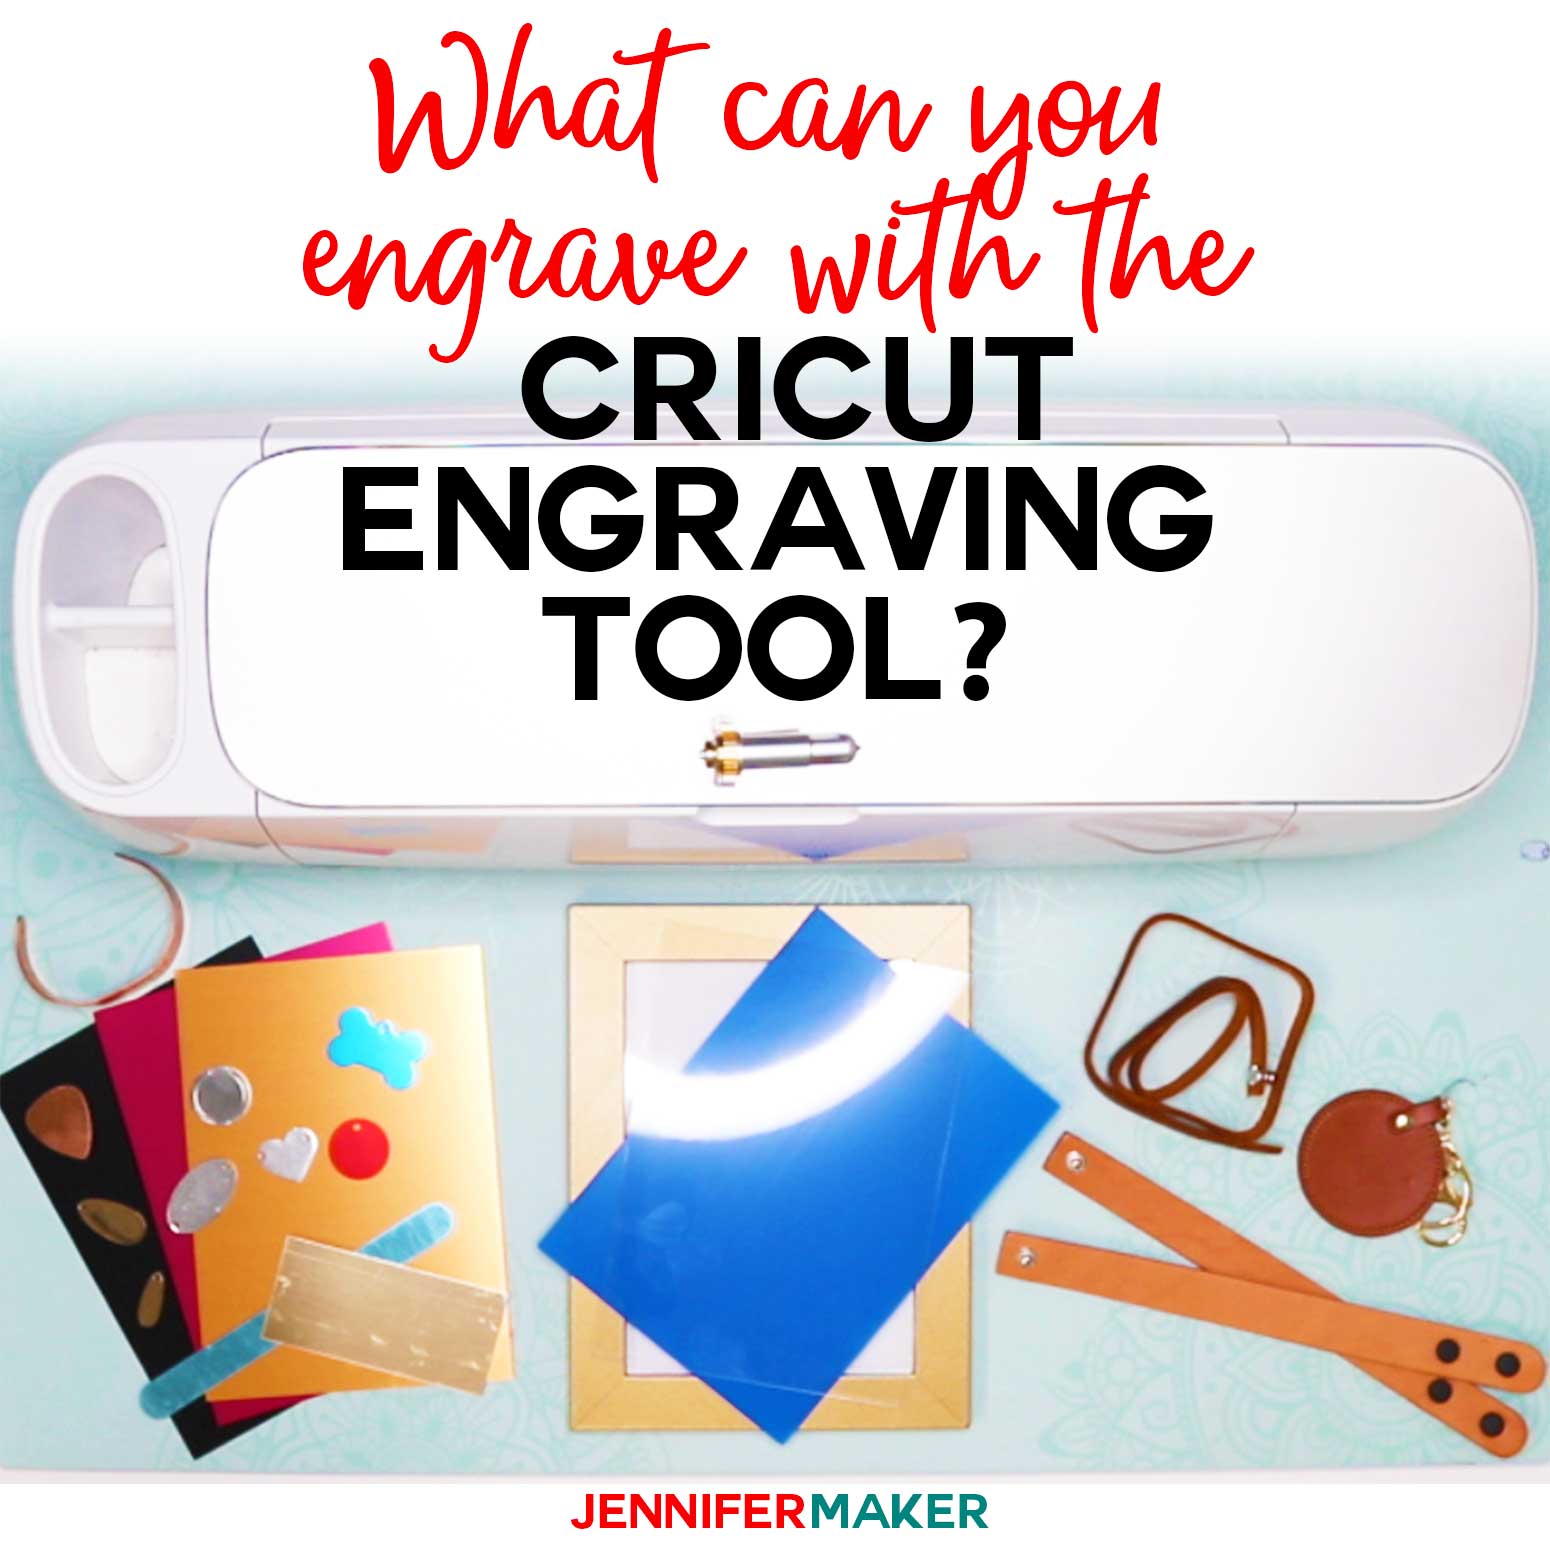 Cricut Maker Engraving Tool: What Materials Can We Engrave?